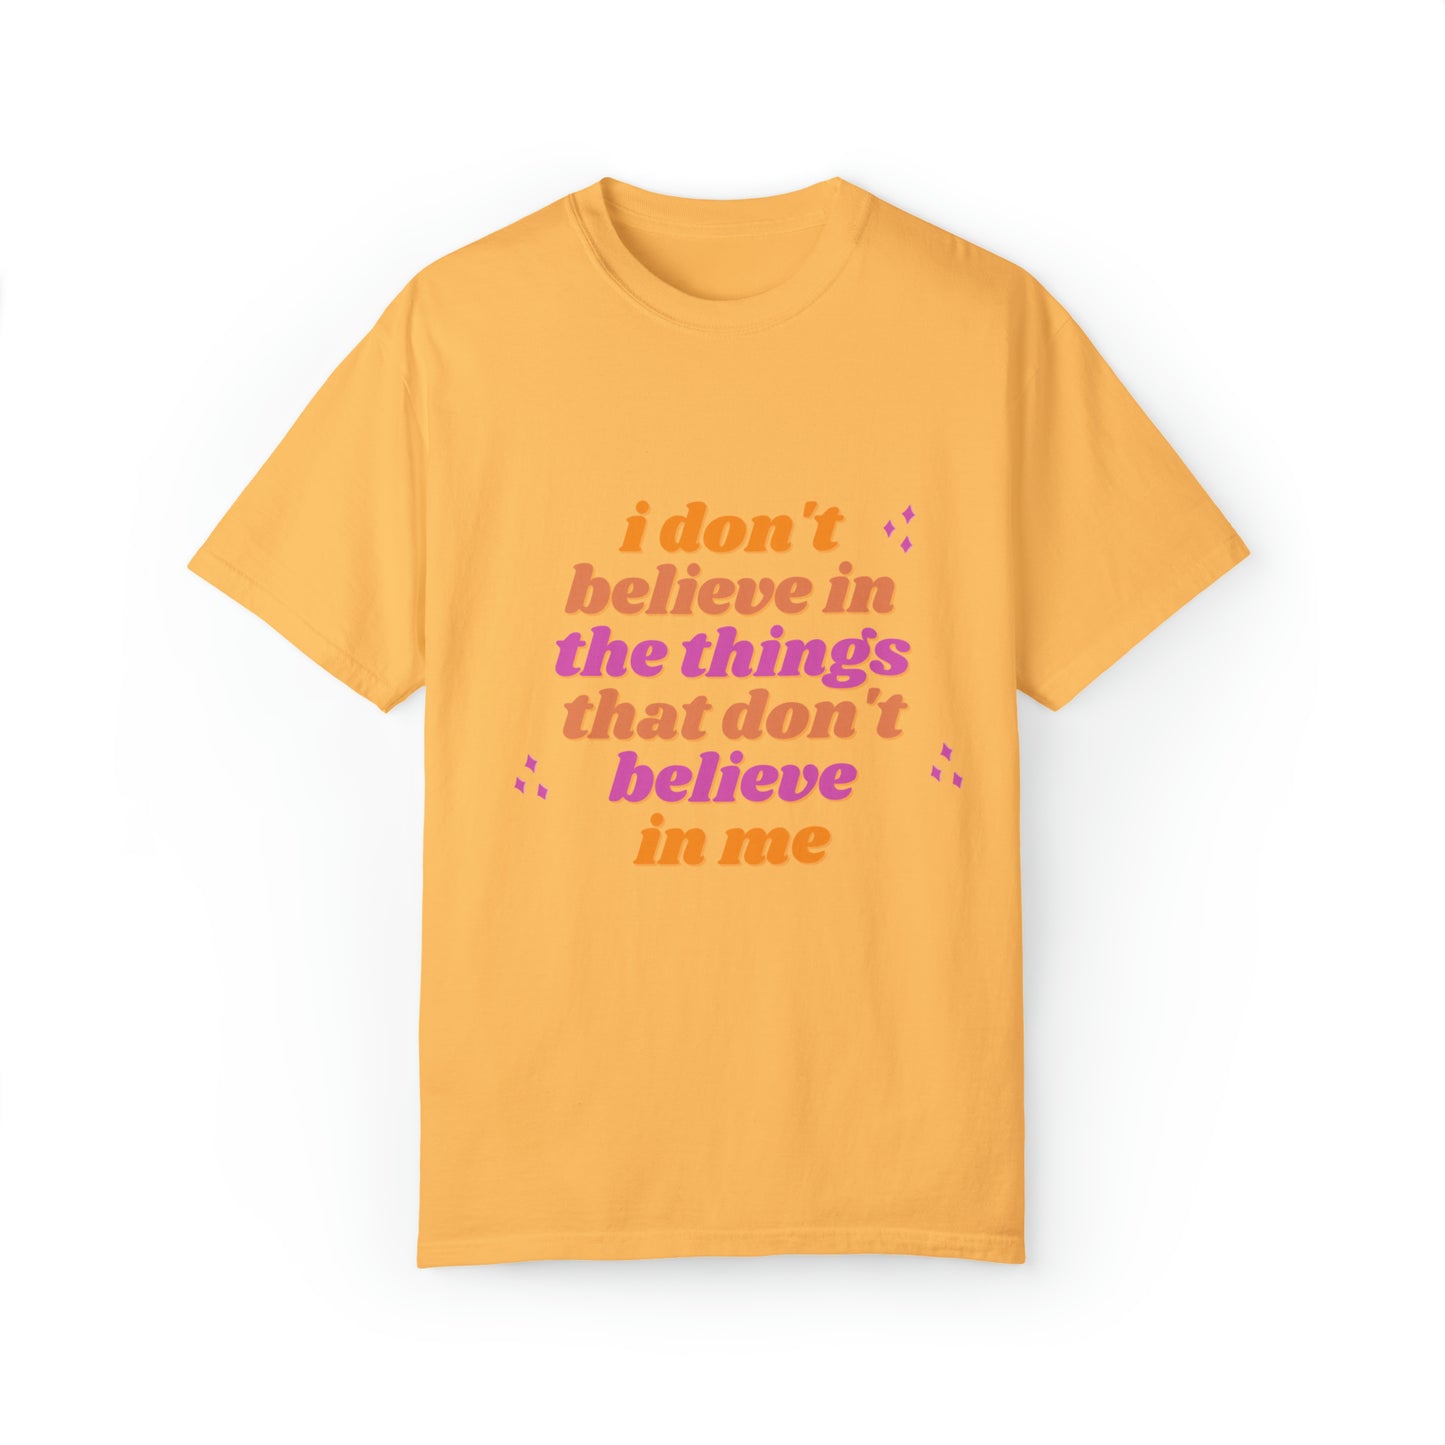 I Don't believe In the Things That Don't Believe in Me - Unisex Garment-Dyed T-shirt